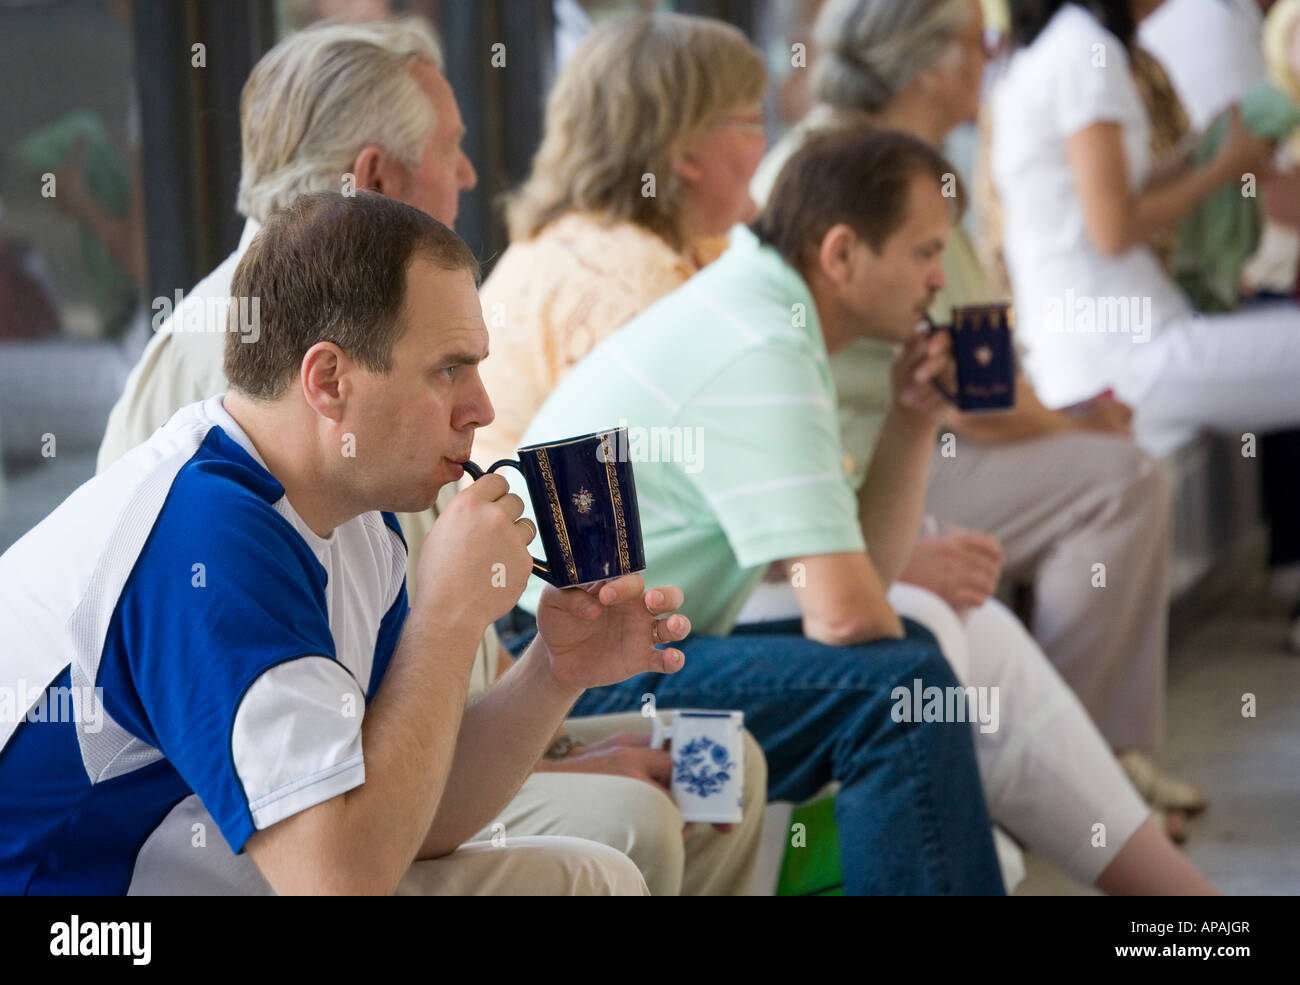 People drinking from traditional becher cups at Vridlo spring no 1 Karlovy Vary Czech Republic Stock Photo